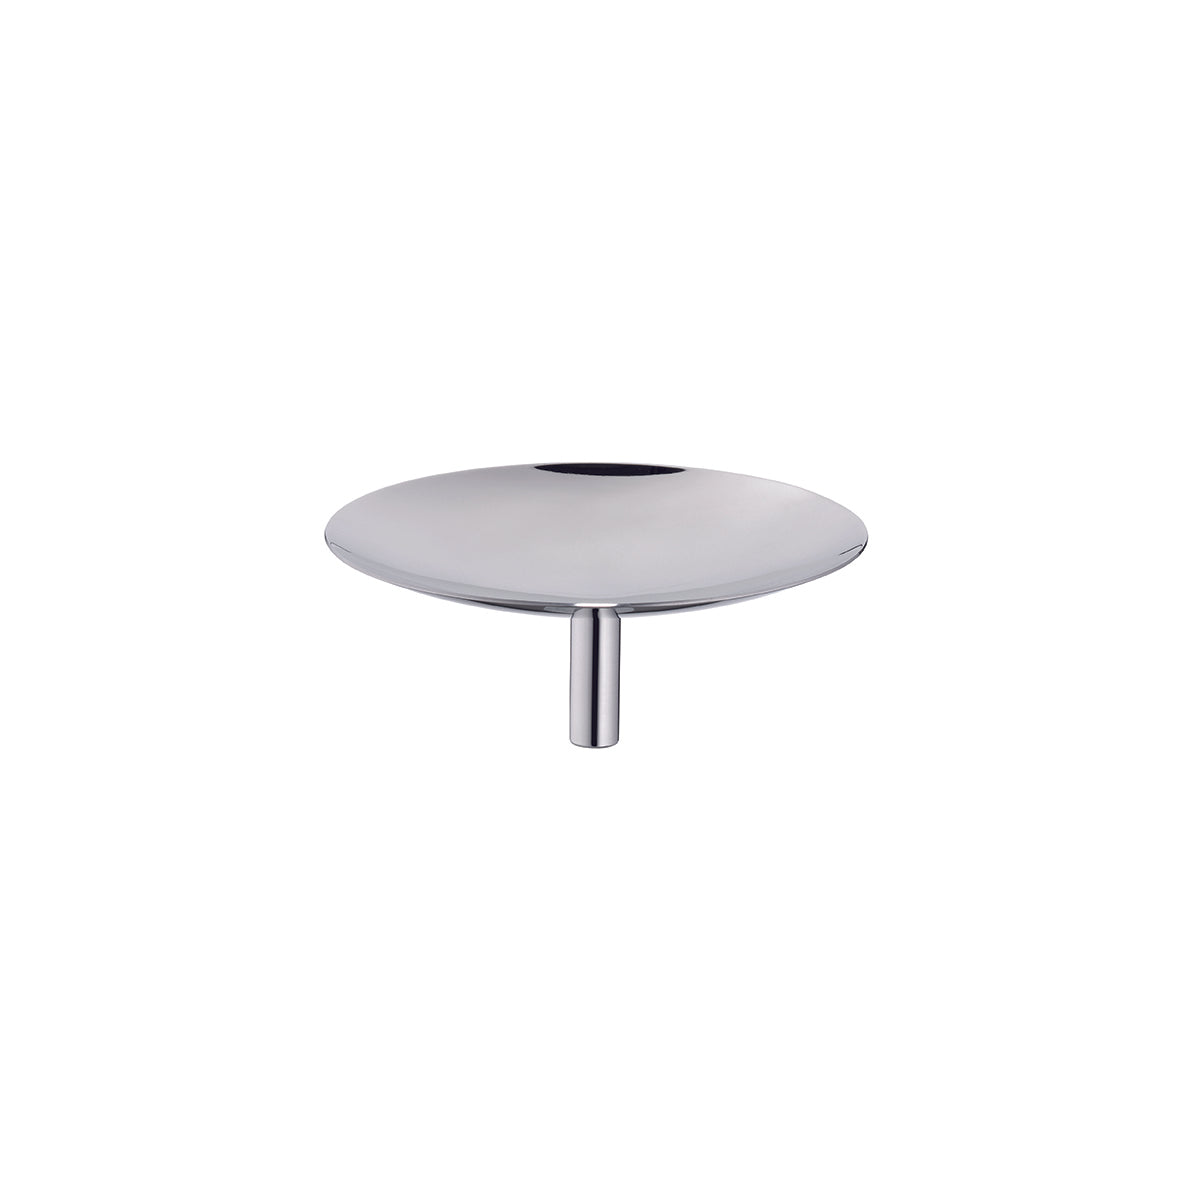 55.0121.6042 WMF Pure Exclusiv Petit-Fours Support Stand Stainless Steel Tomkin Australia Hospitality Supplies